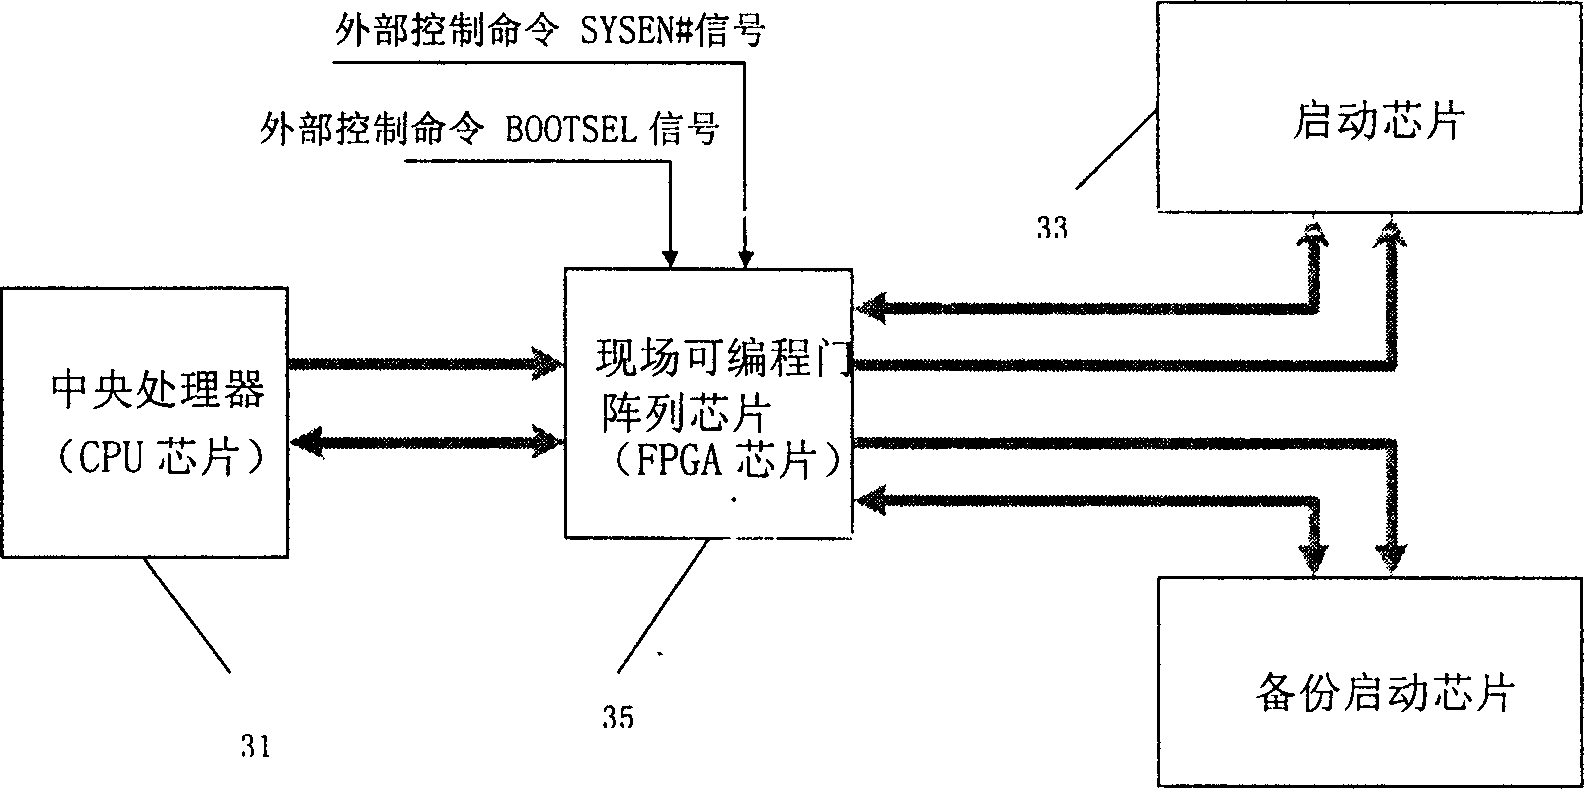 System mainboard for embedded computer systems